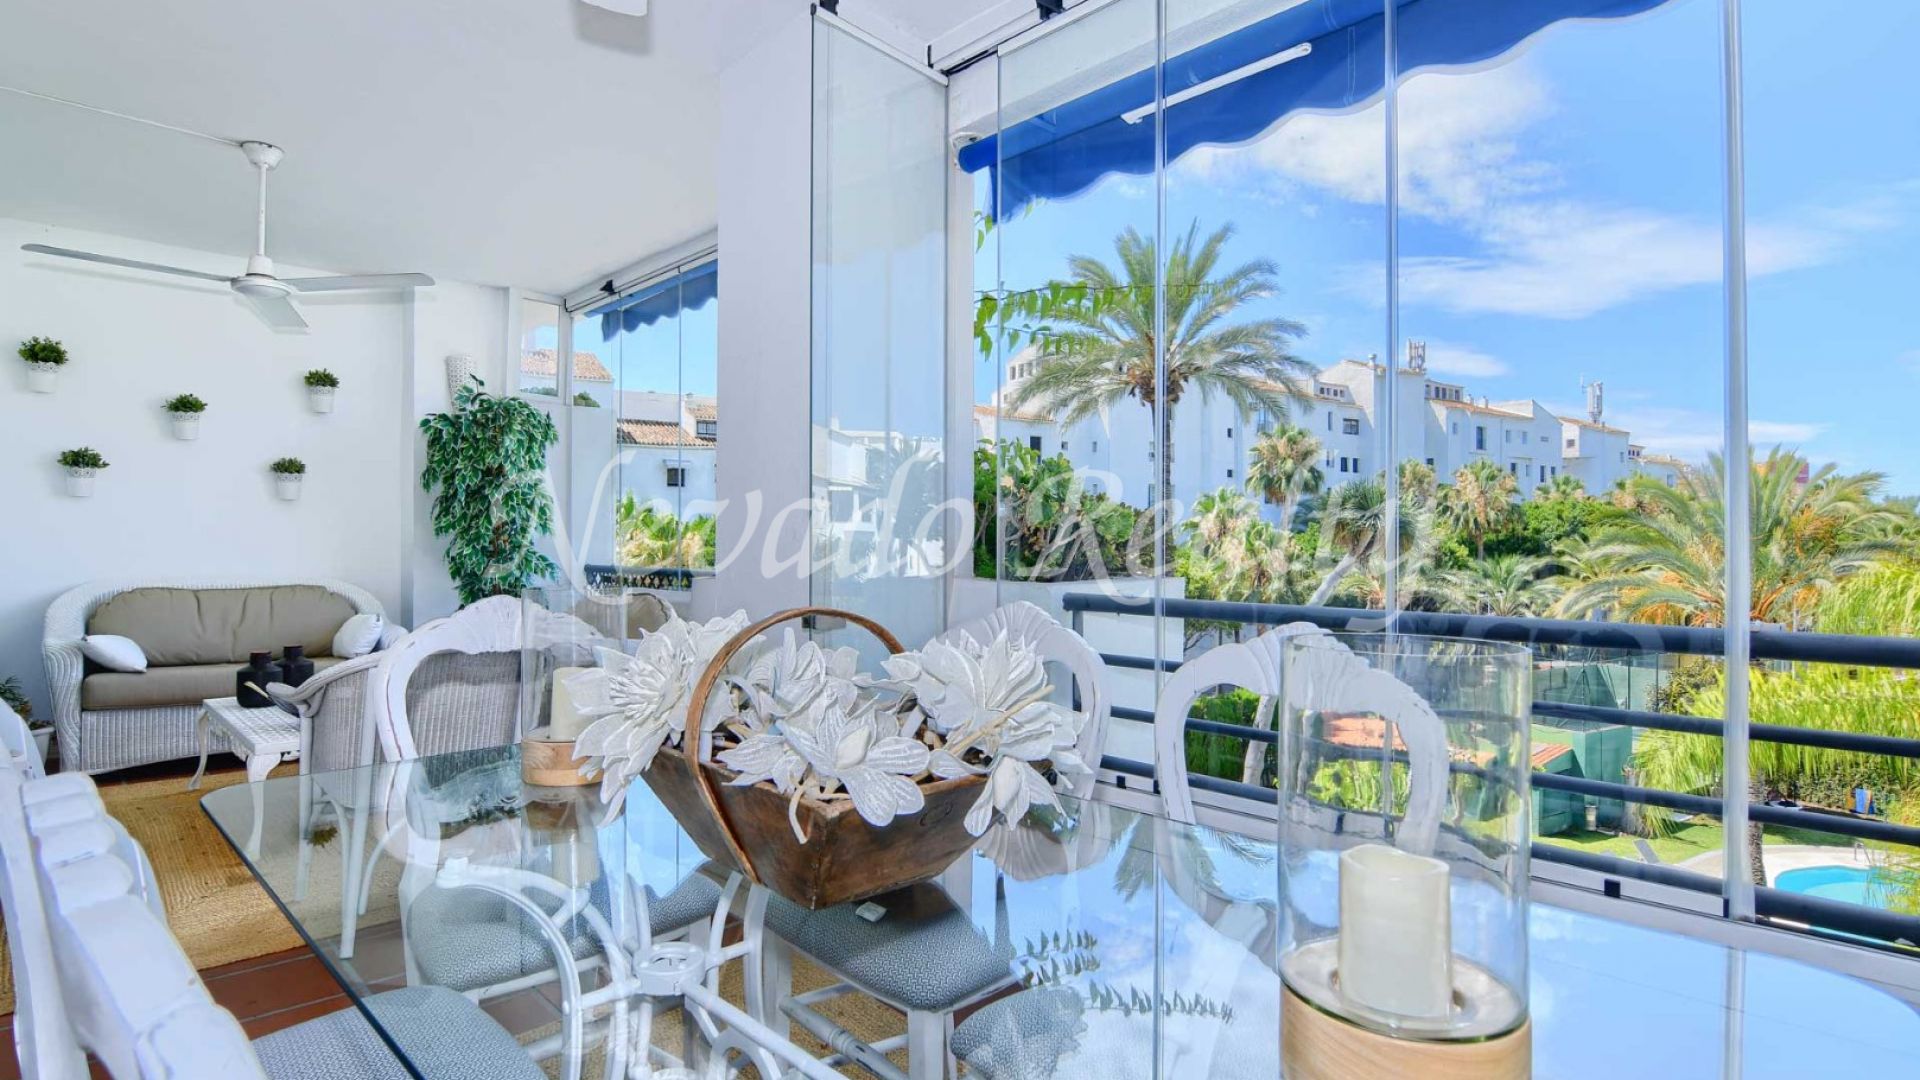 Apartment for sale next to the beach in Puerto Banús